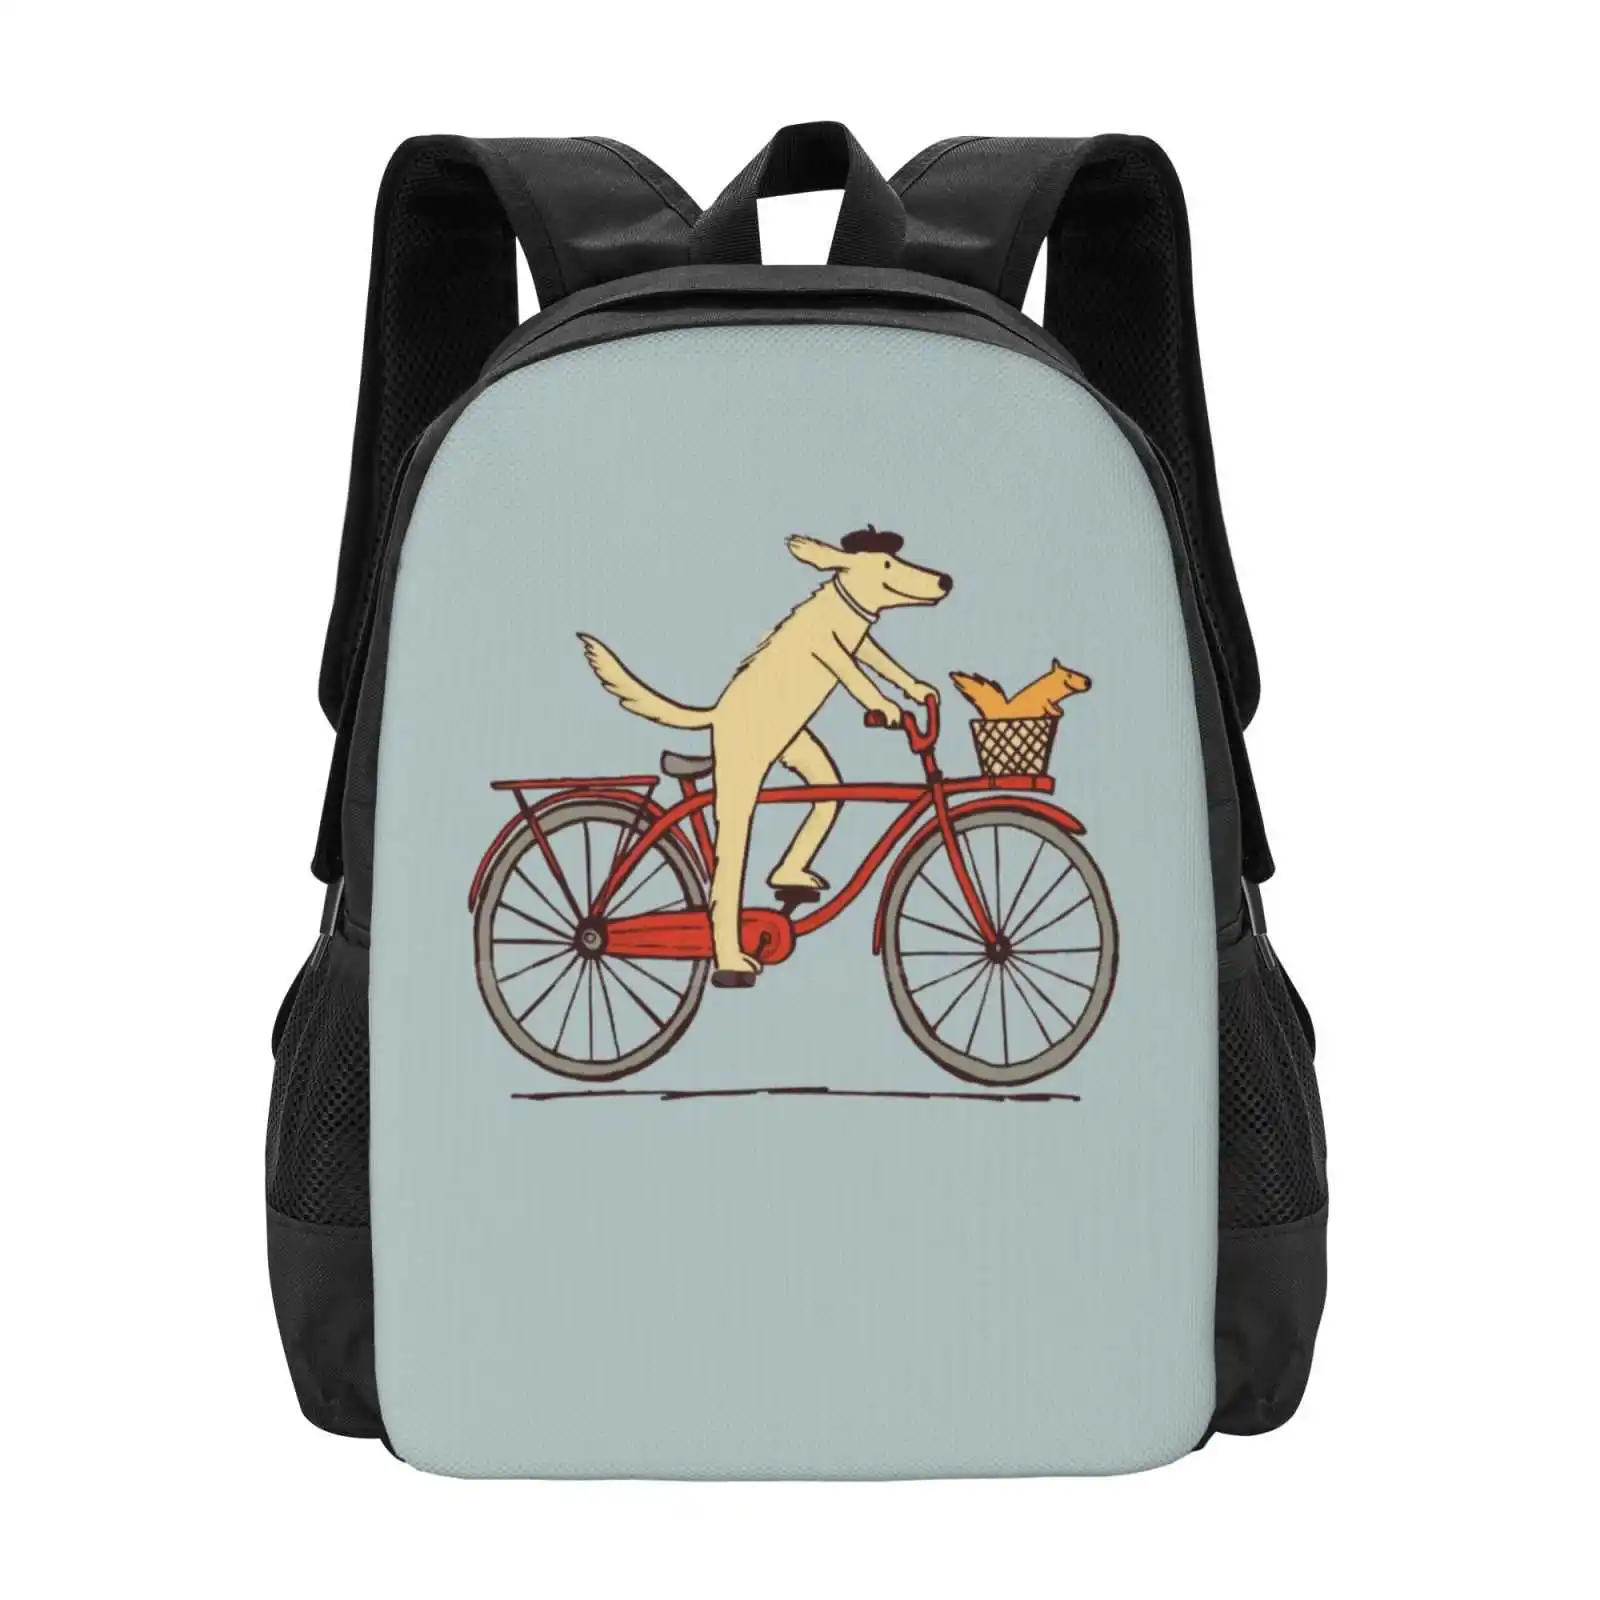 

Dog And Squirrel Are Friends | Whimsical Animal Art | Dog Riding A Bicycle Hot Sale Backpack Fashion Bags Cute Humorous